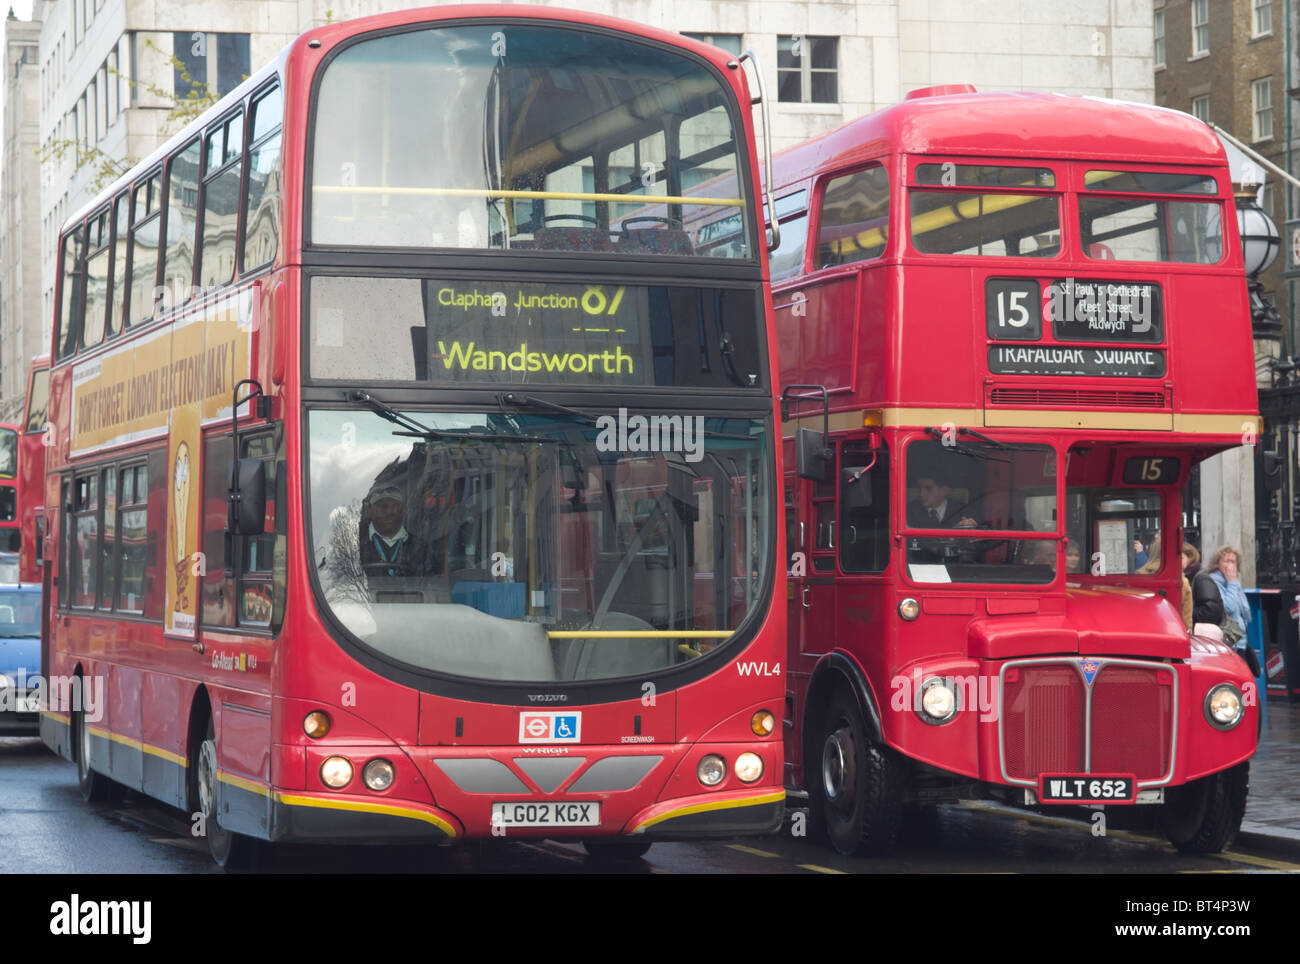 A Routemaster double decker bus operates on heritage route 15 next to a modern Go-Ahead bus in London, England, UK. Stock Photo